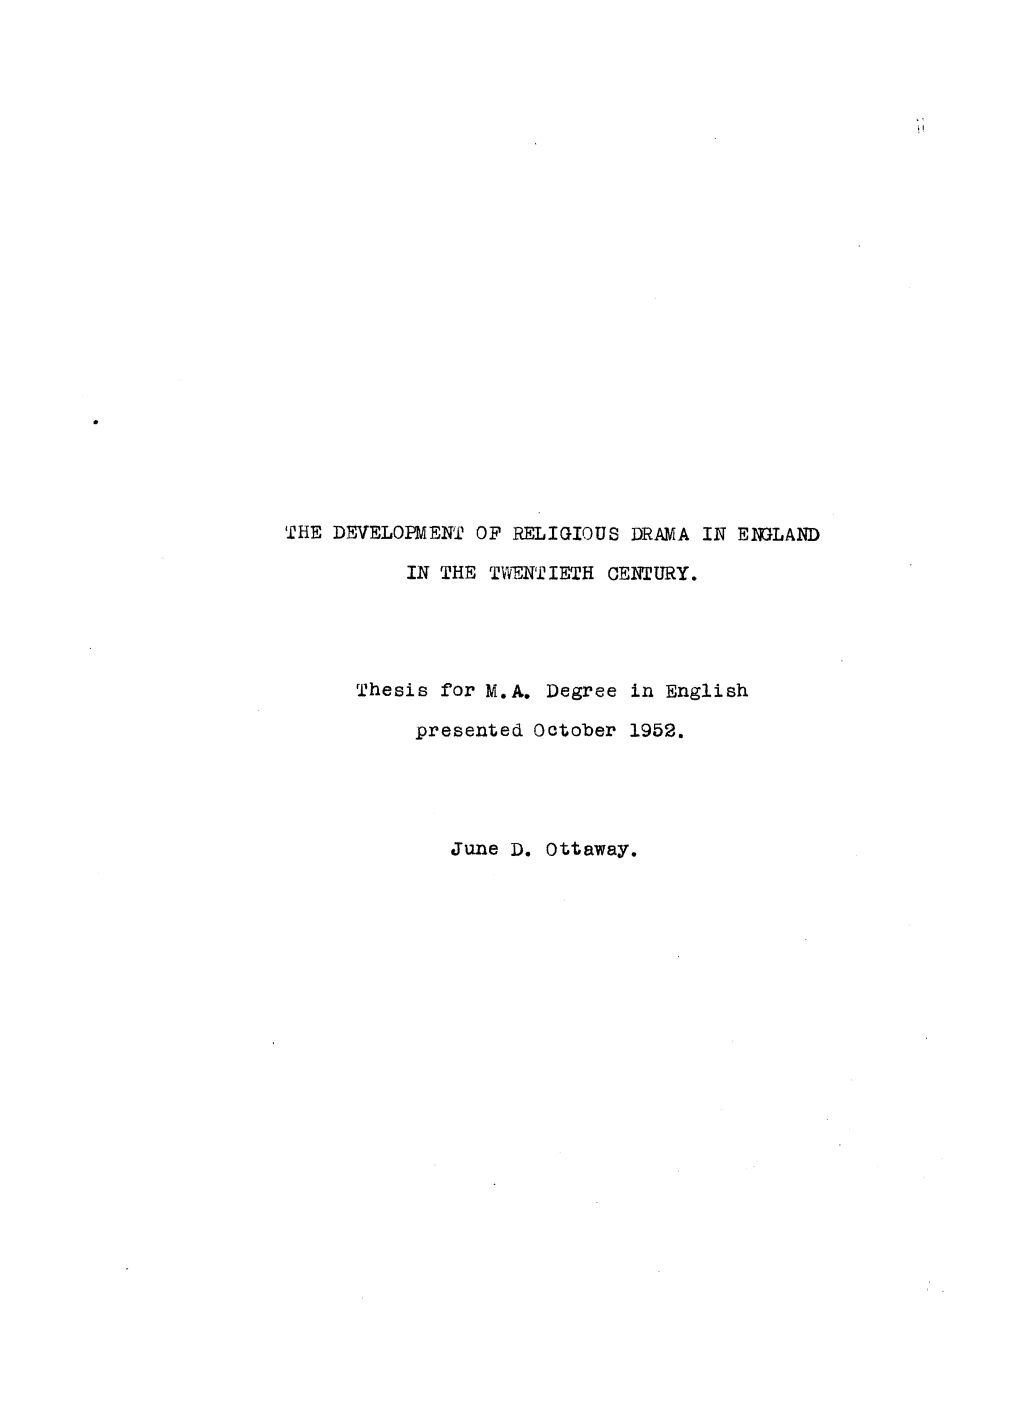 THE DEVELOPMENT OP RELIGIOUS DRAMA in ENGLAND in the TWENTIETH CENTURY. Thesis for M.A, Degree in English Presented October 1952